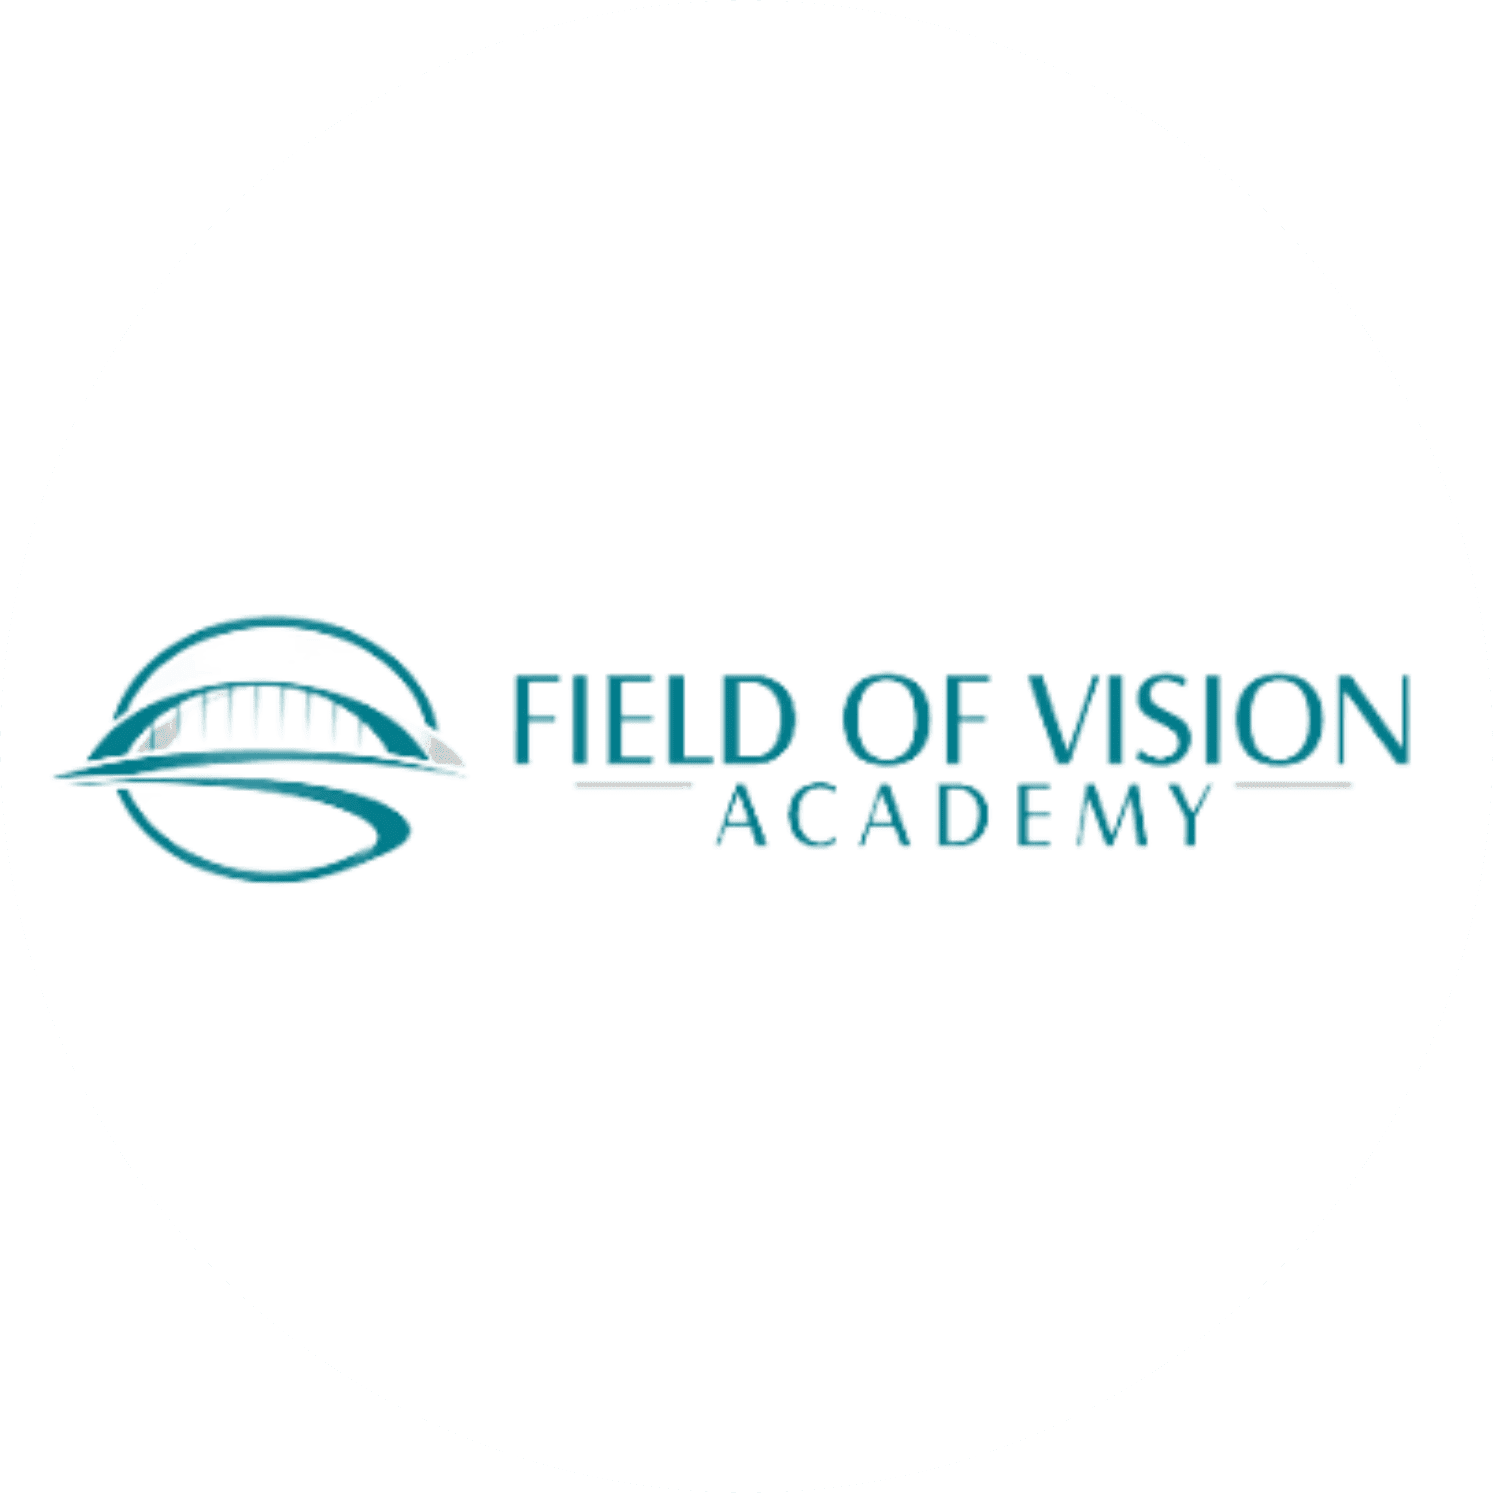 Field of Vision Academy